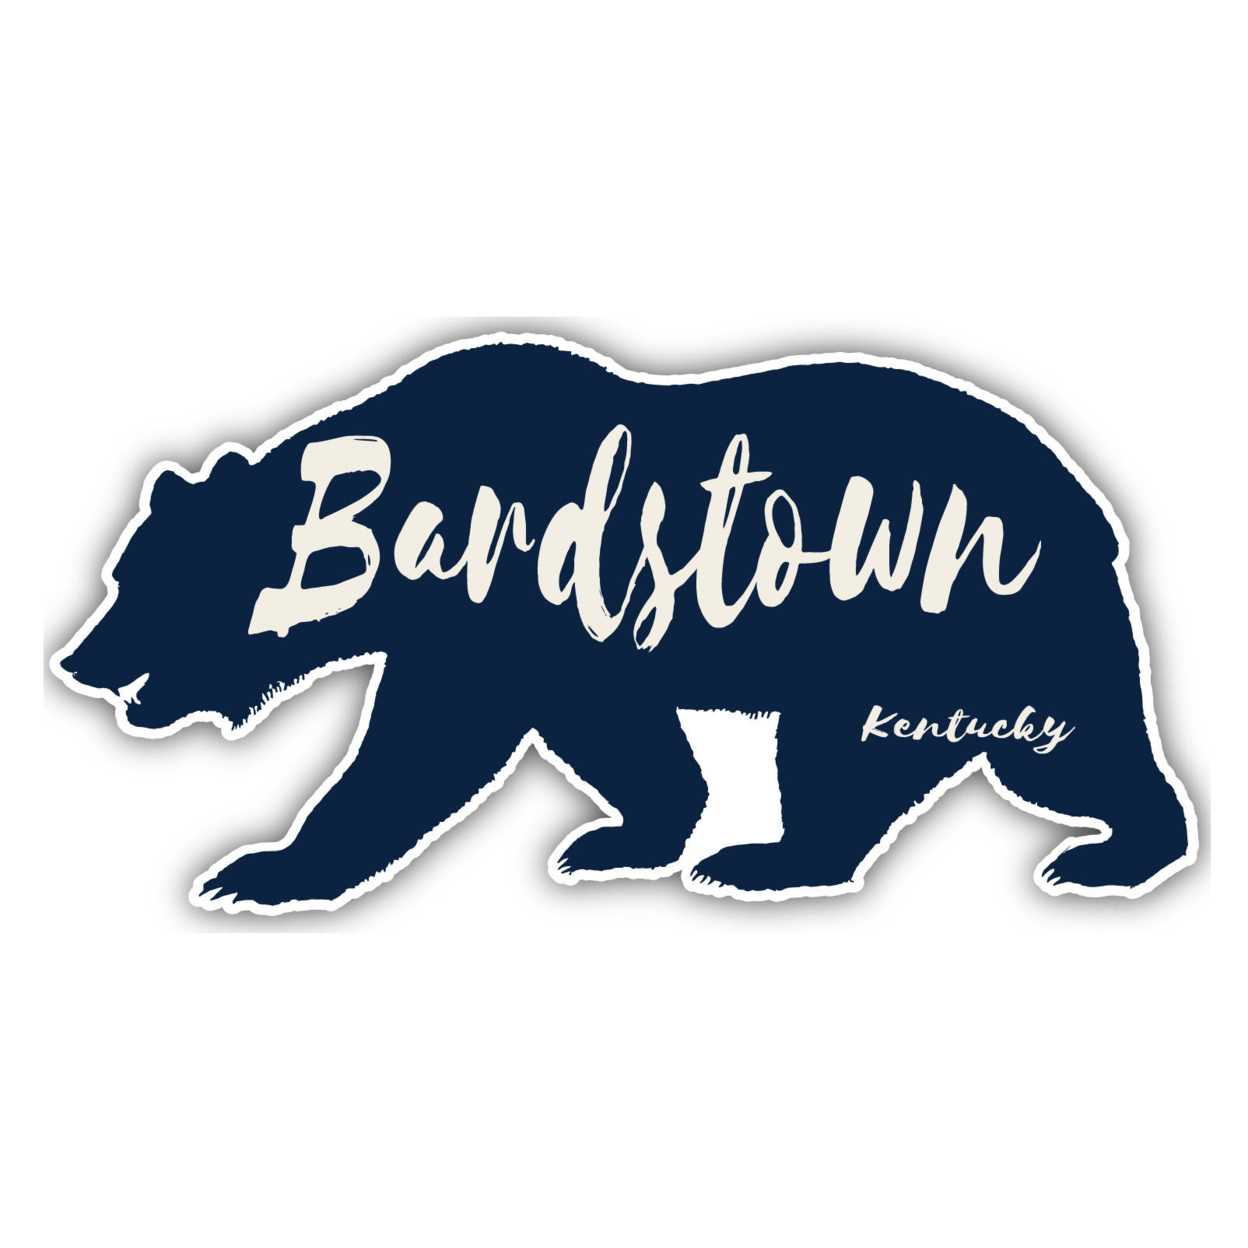 Bardstown Kentucky Souvenir Decorative Stickers (Choose Theme And Size) - 4-Pack, 6-Inch, Great Outdoors